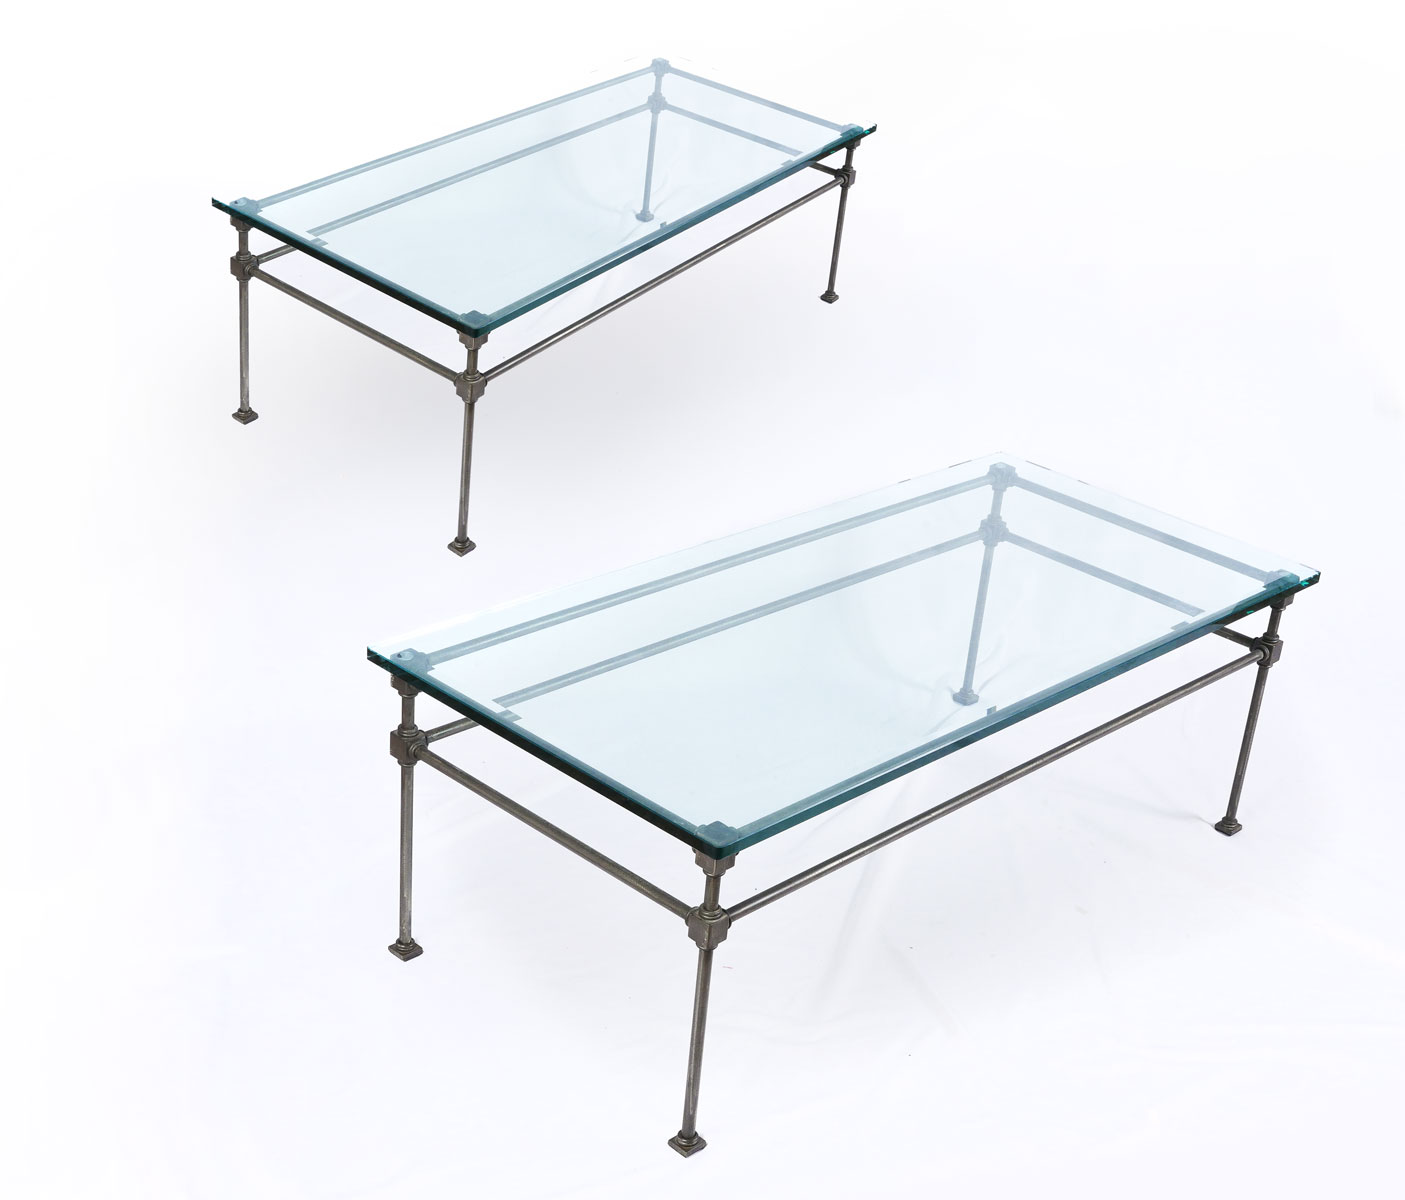 PAIR OF GLASS TOP COFFEE TABLES: